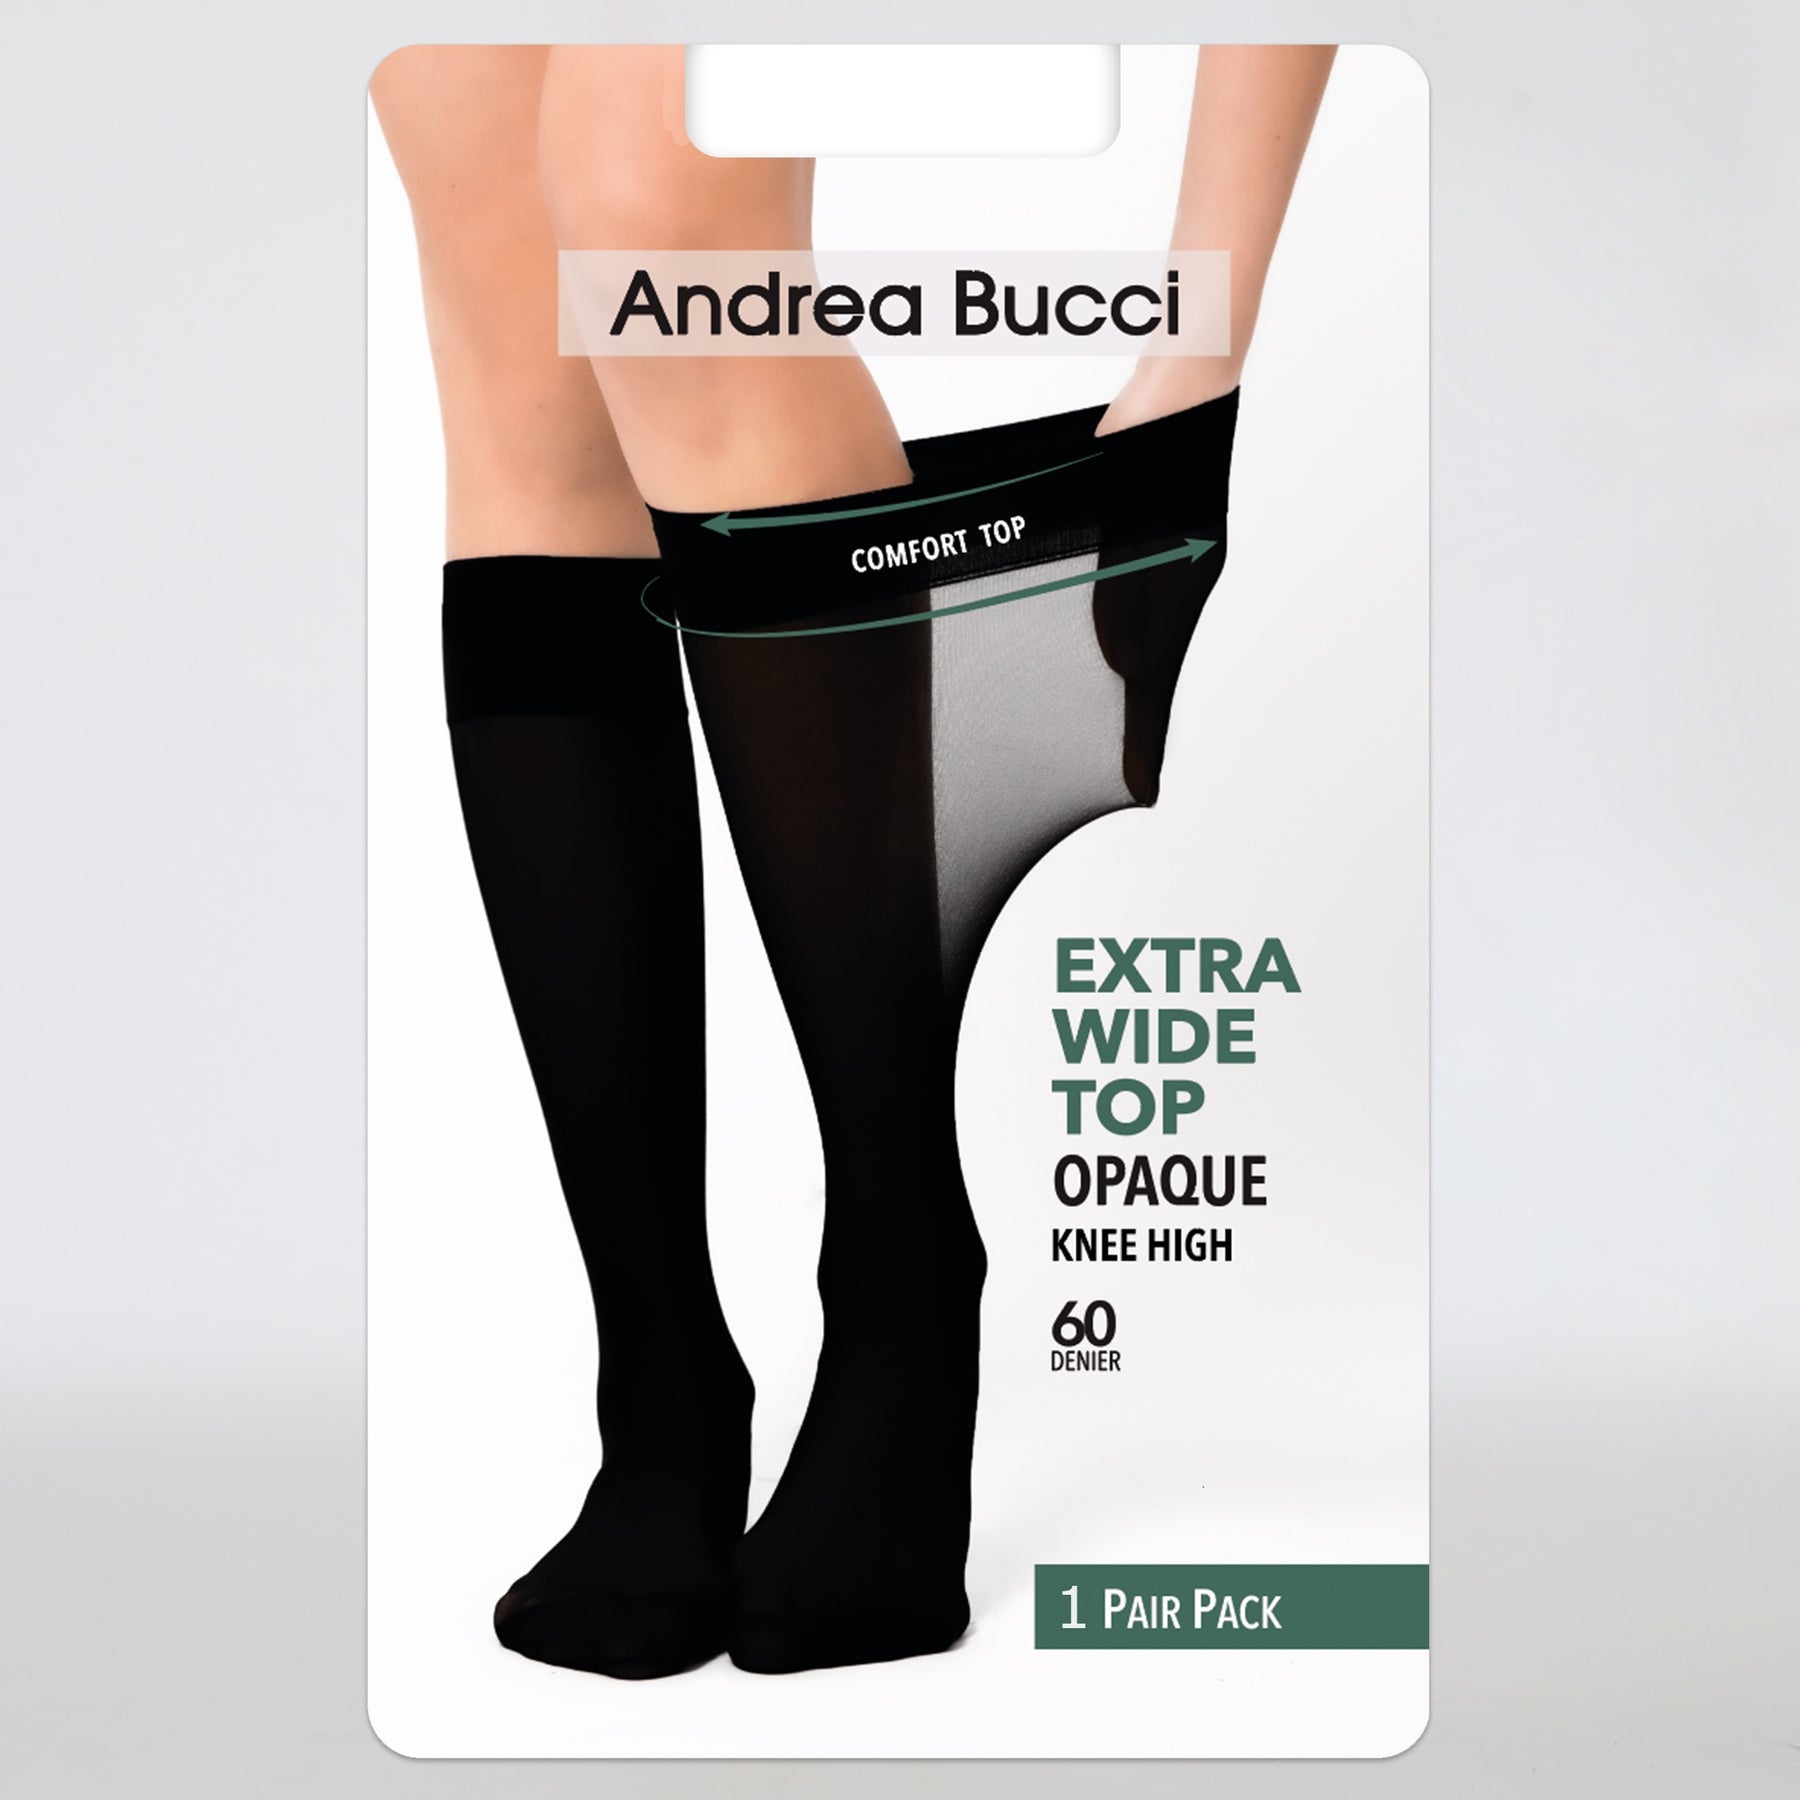 Sculpt your figure with Aristoc Bodytoners, Tum, Bum and Thigh